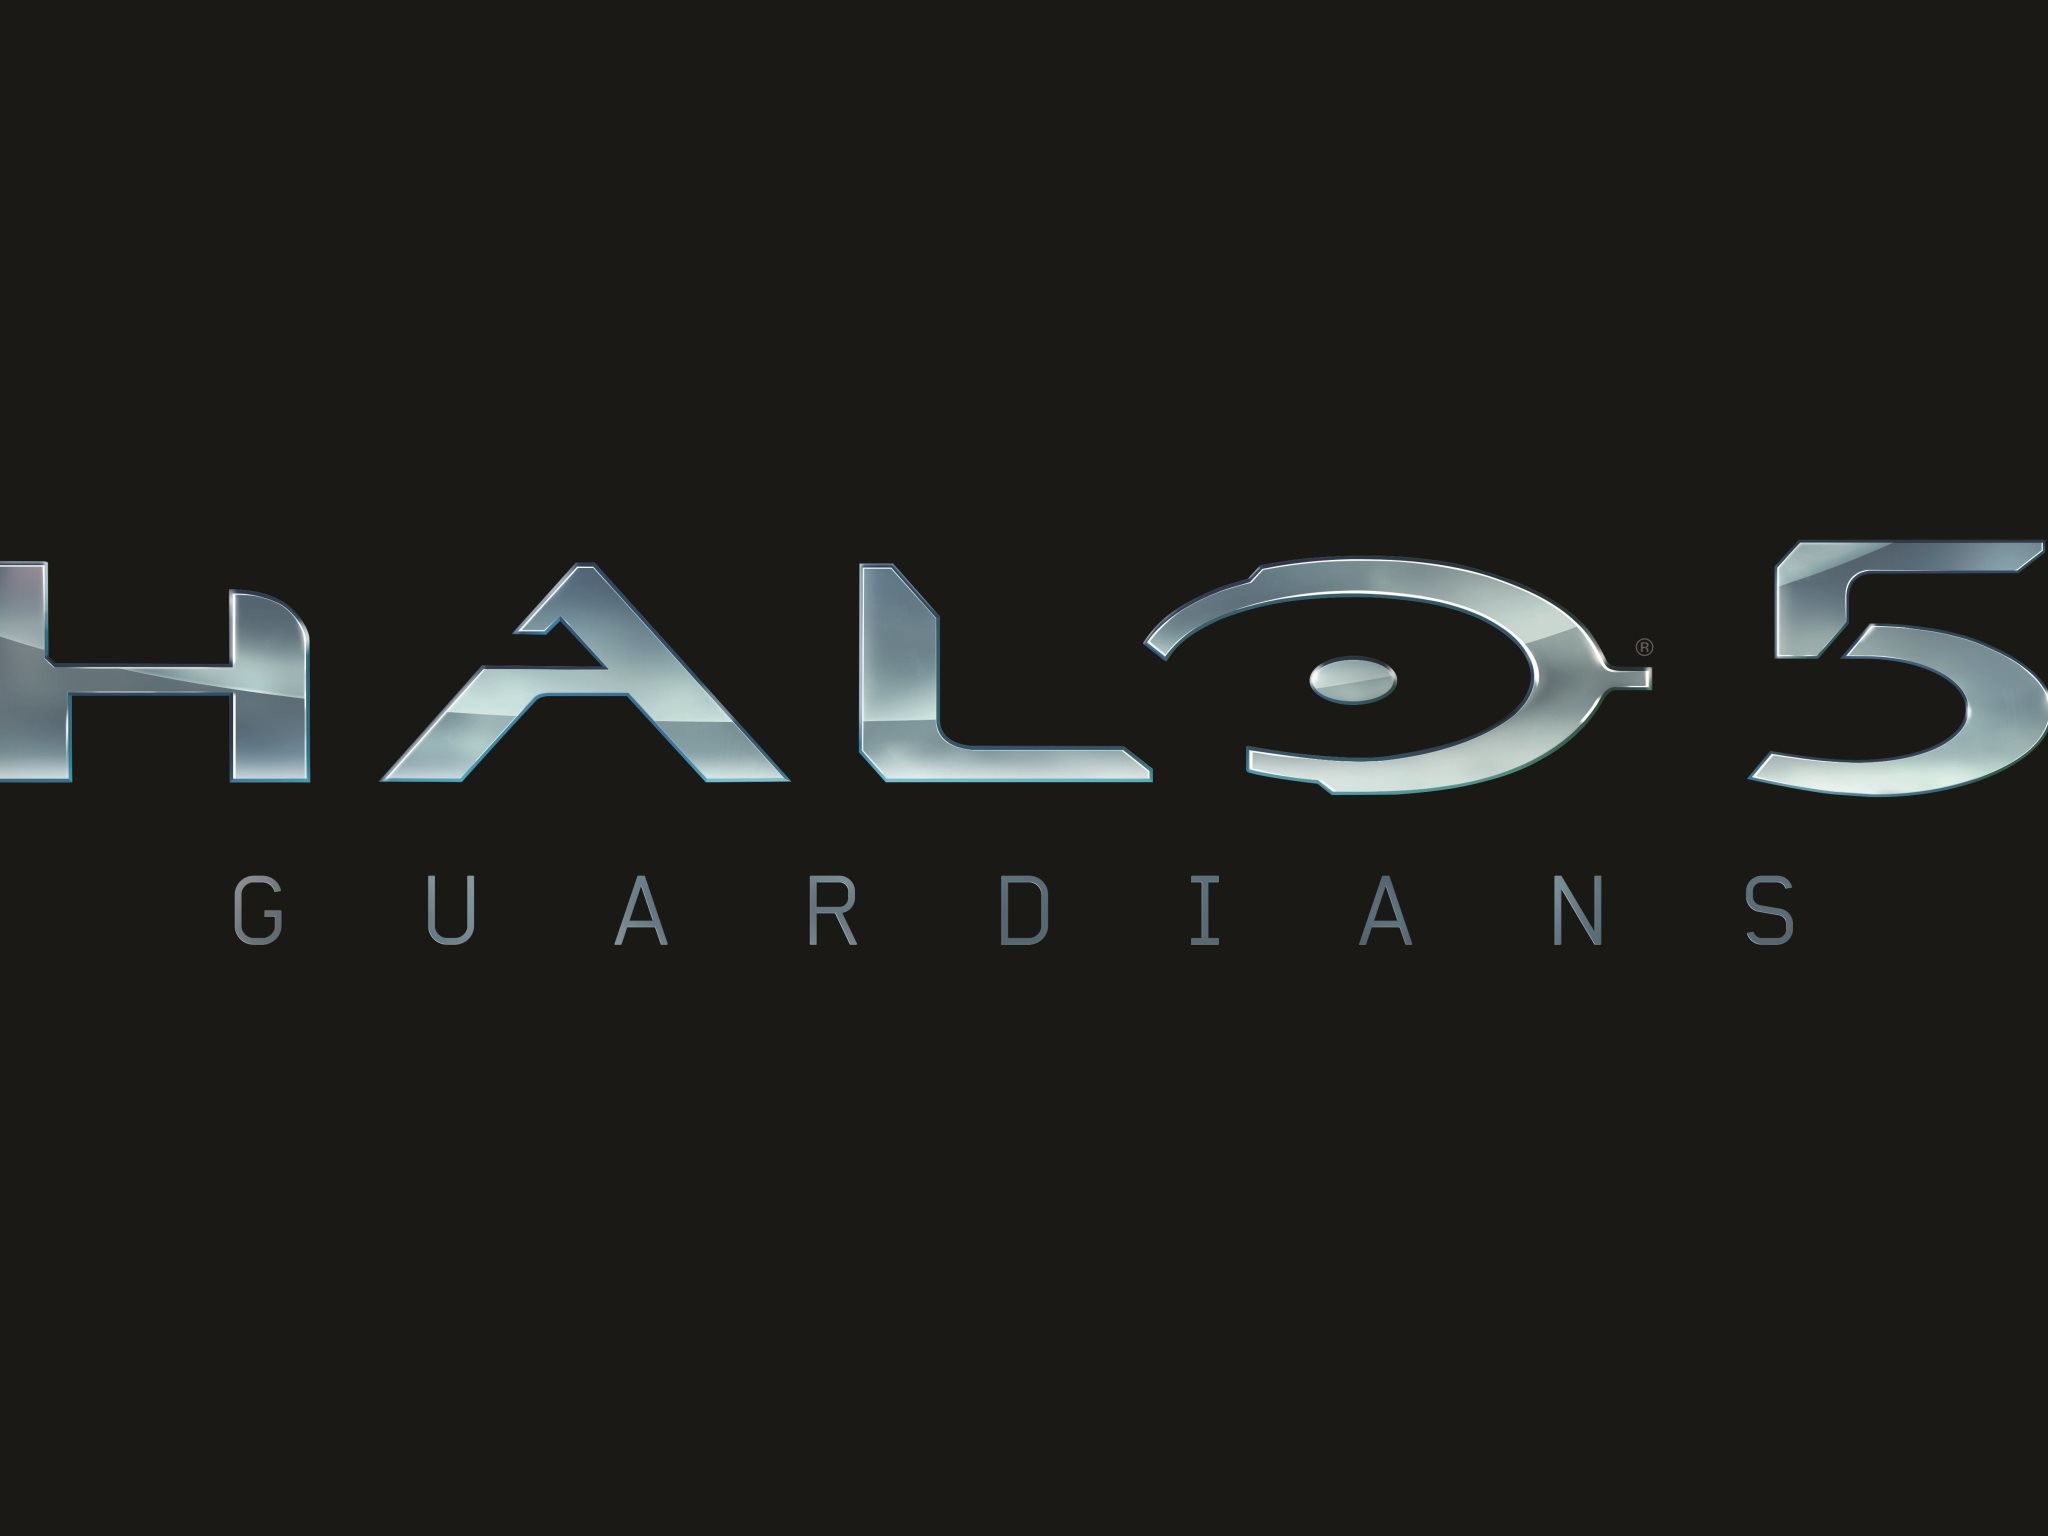 2048x1536 Halo 5: Guardians in the 2nd wallpaper optimized at 4K, HD and wide sizes